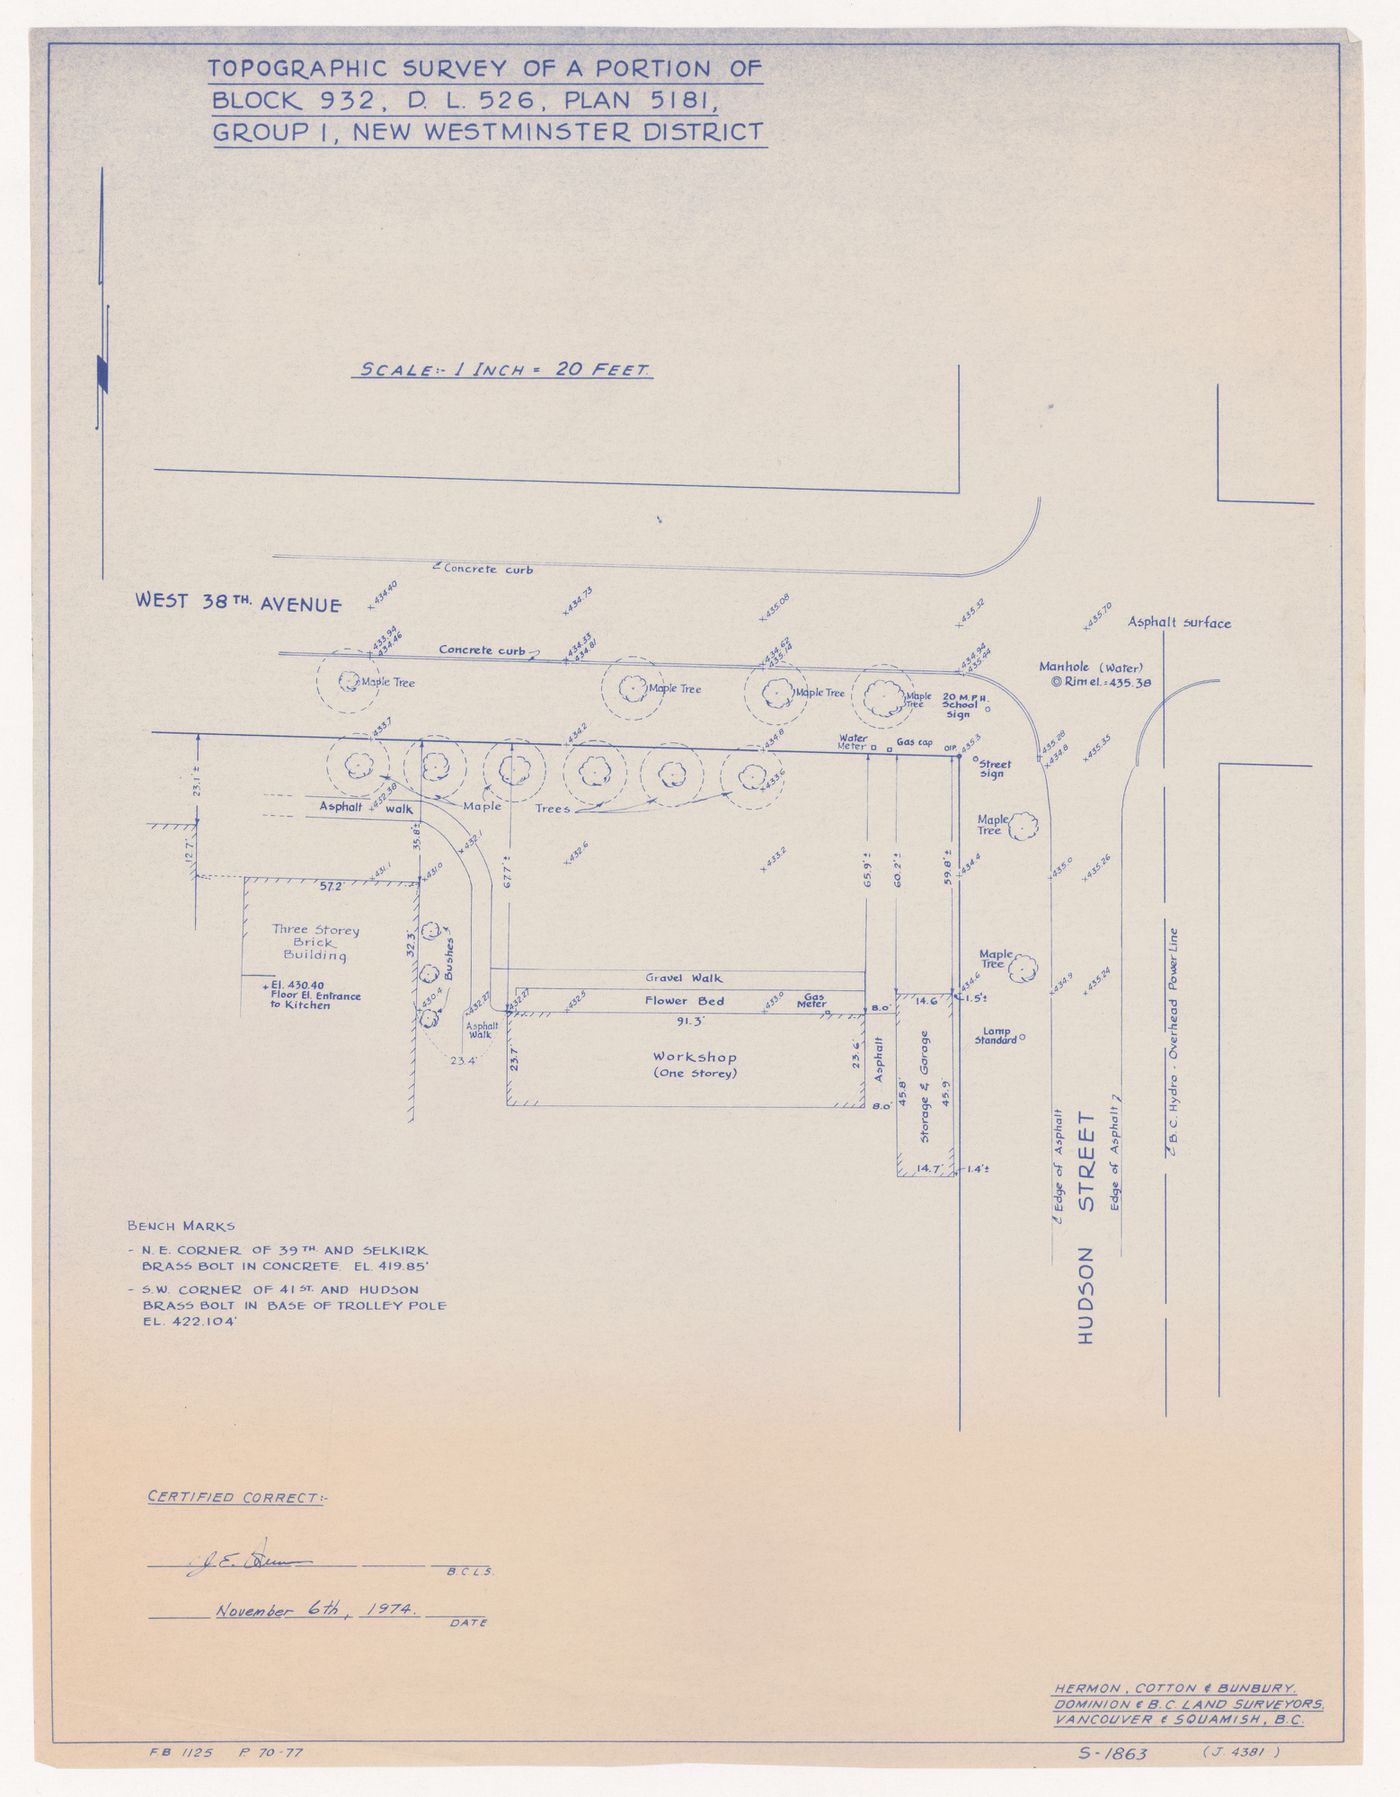 Topographic survey for Playground, 38th and Hoodson, Vancouver, British Columbia